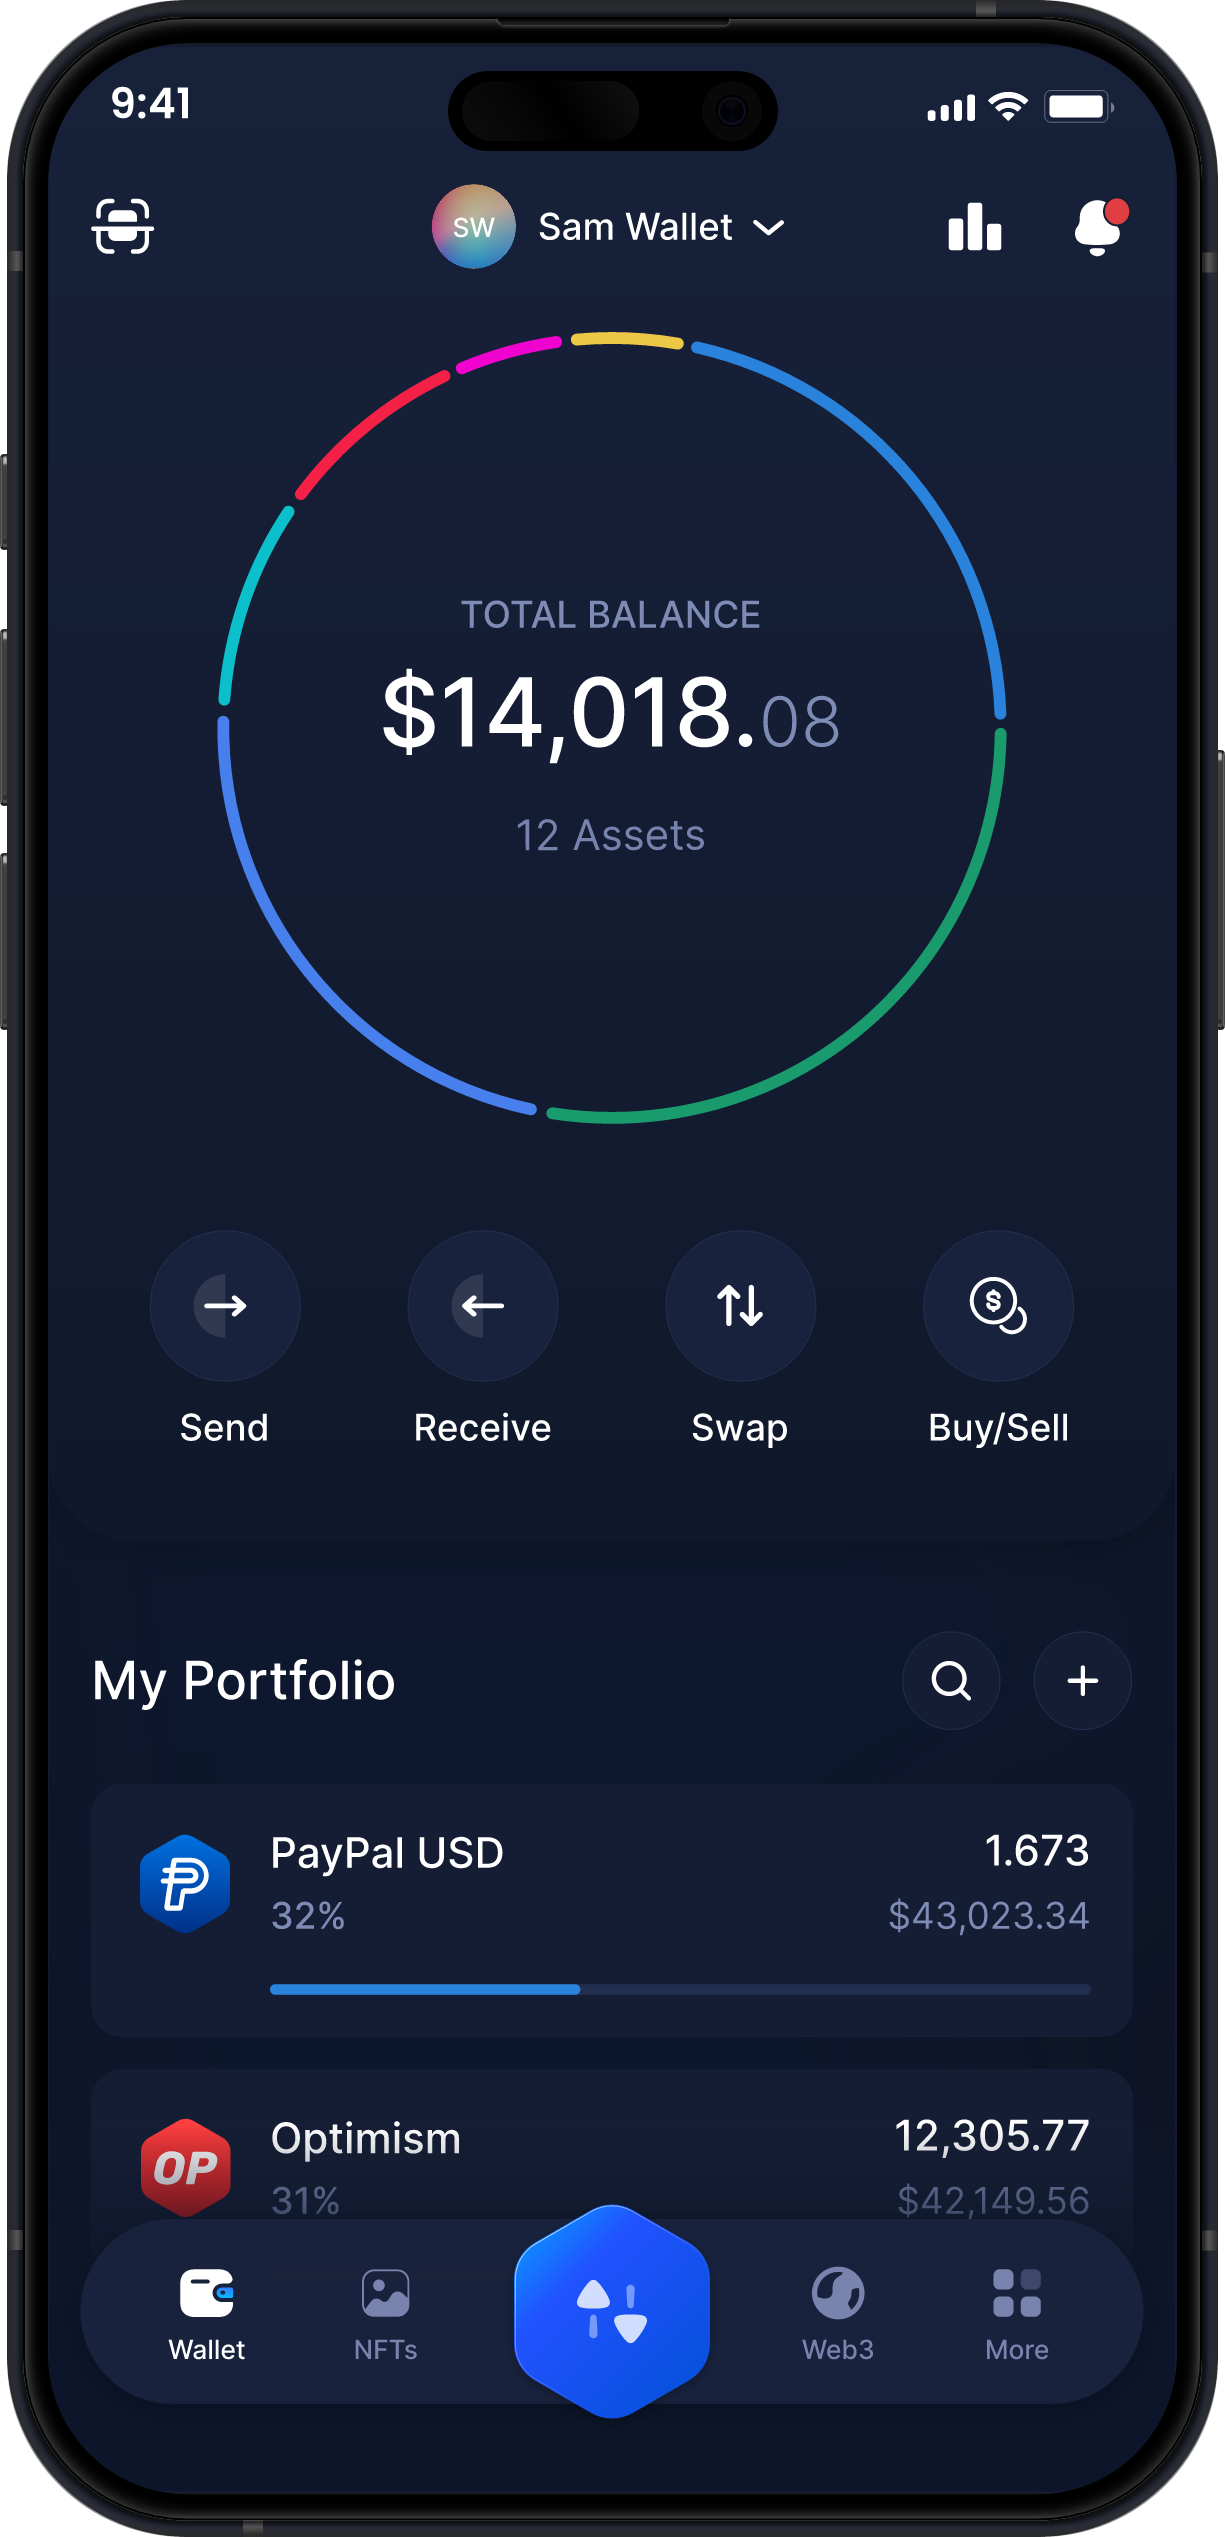 Infinity Mobile PayPal USD Wallet - PYUSD Dashboard